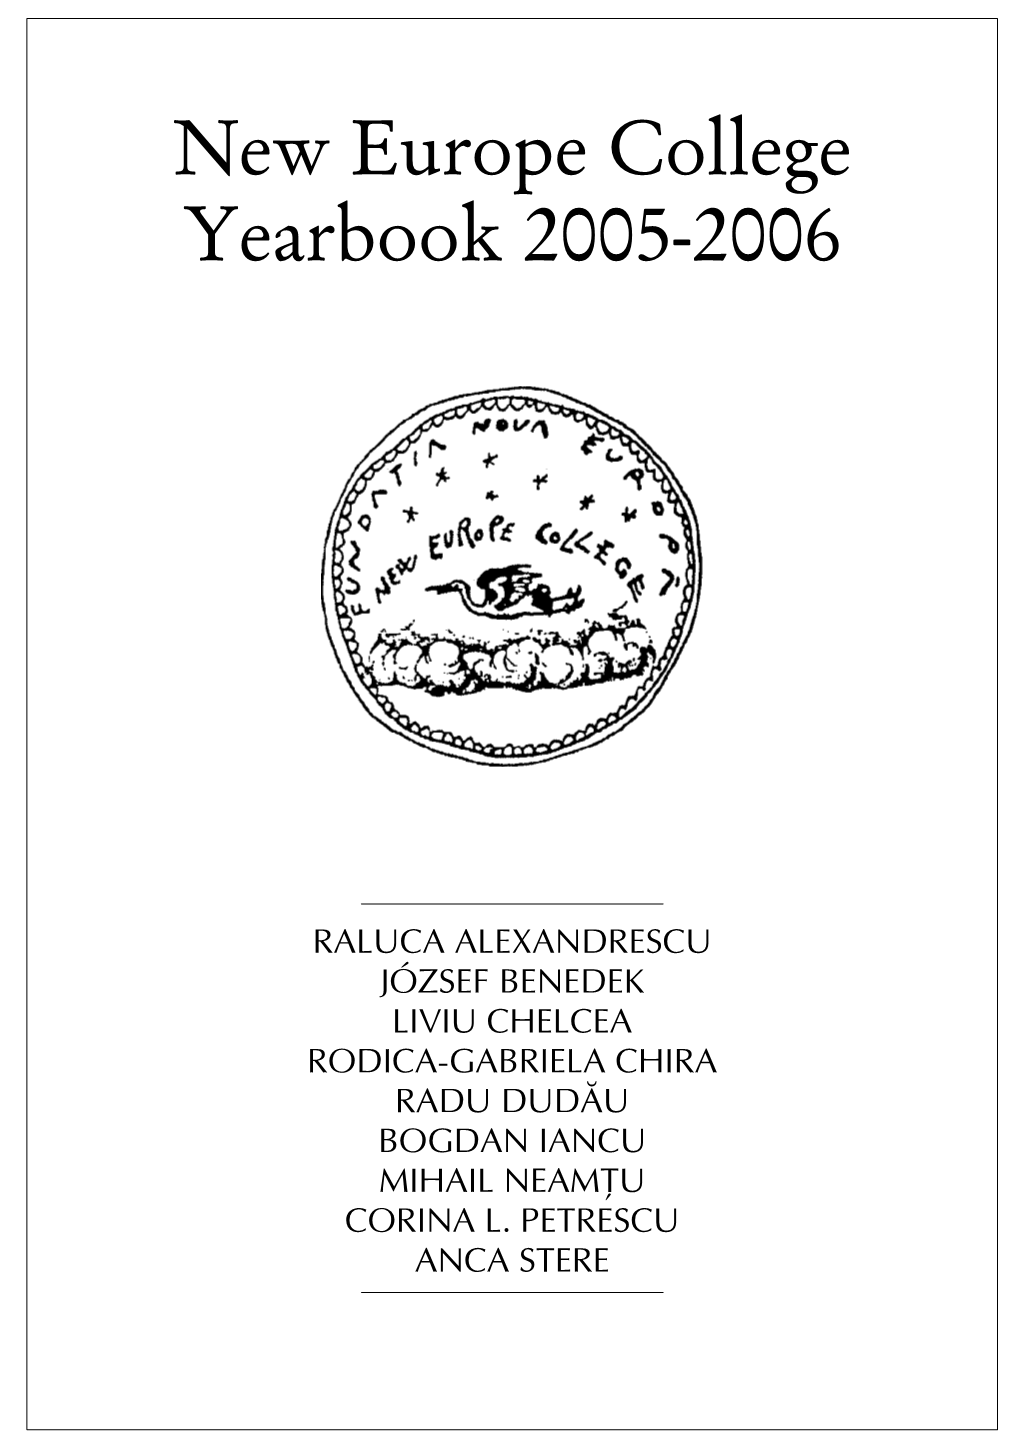 New Europe College Yearbook 2005-2006